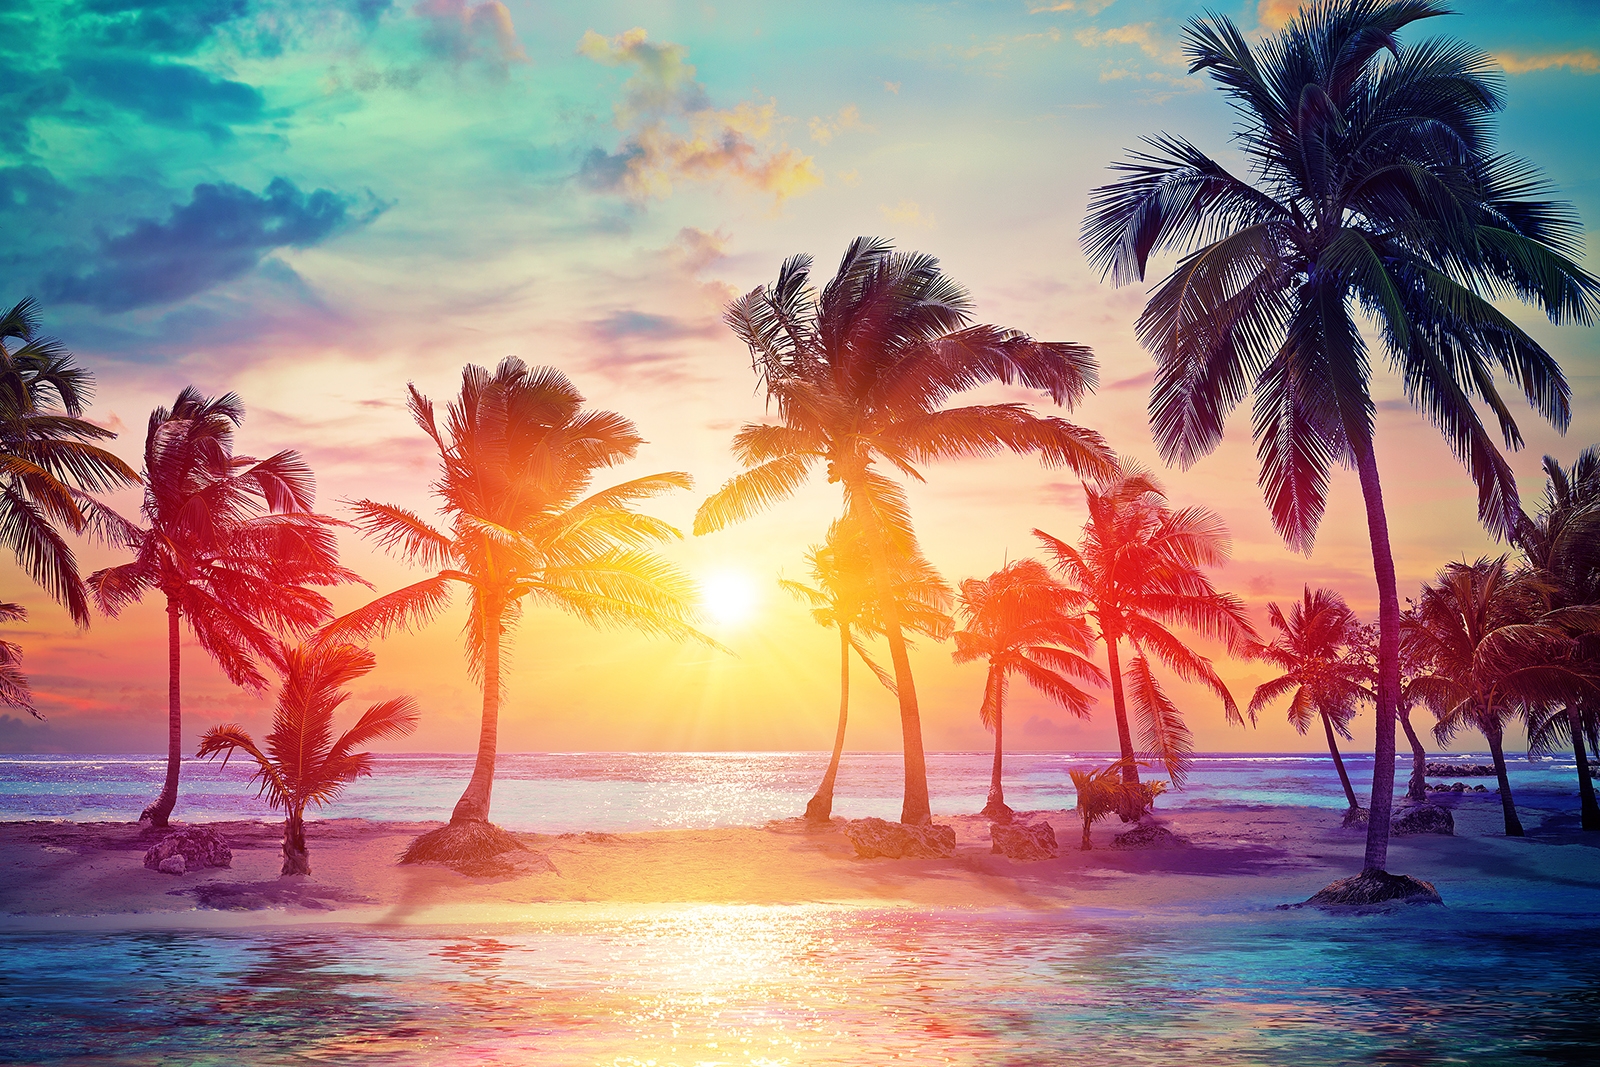 Palm Trees Silhouettes On Tropical Beach At Sunset - Modern Vintage Colors (c) Bahamas